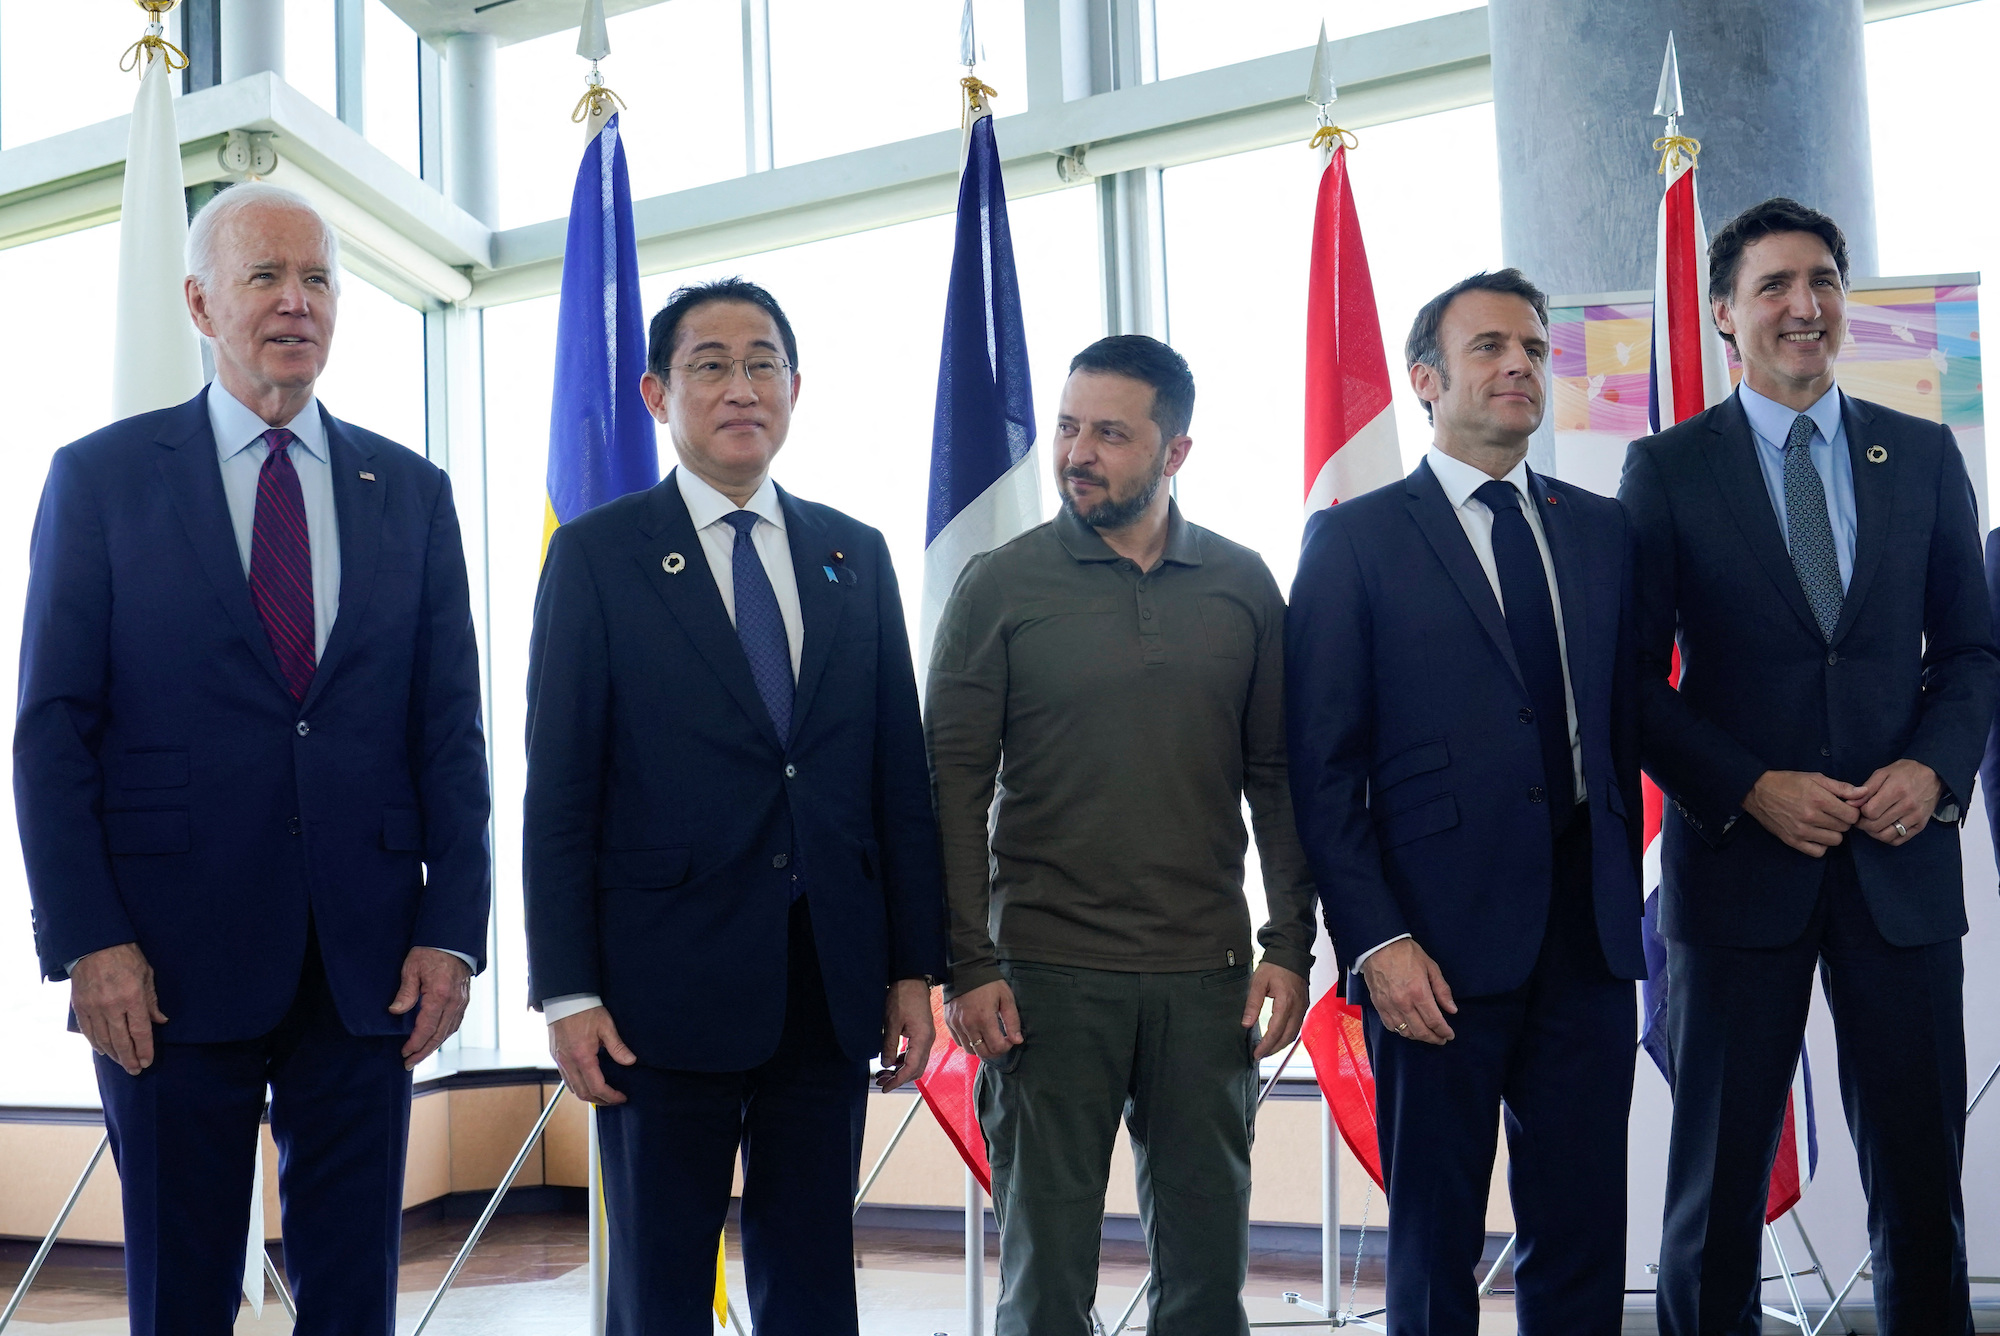 World leaders pose for a photo with Ukrainian President Volodymyr Zelensky before a working session during the G7 Summit in Hiroshima on Sunday.